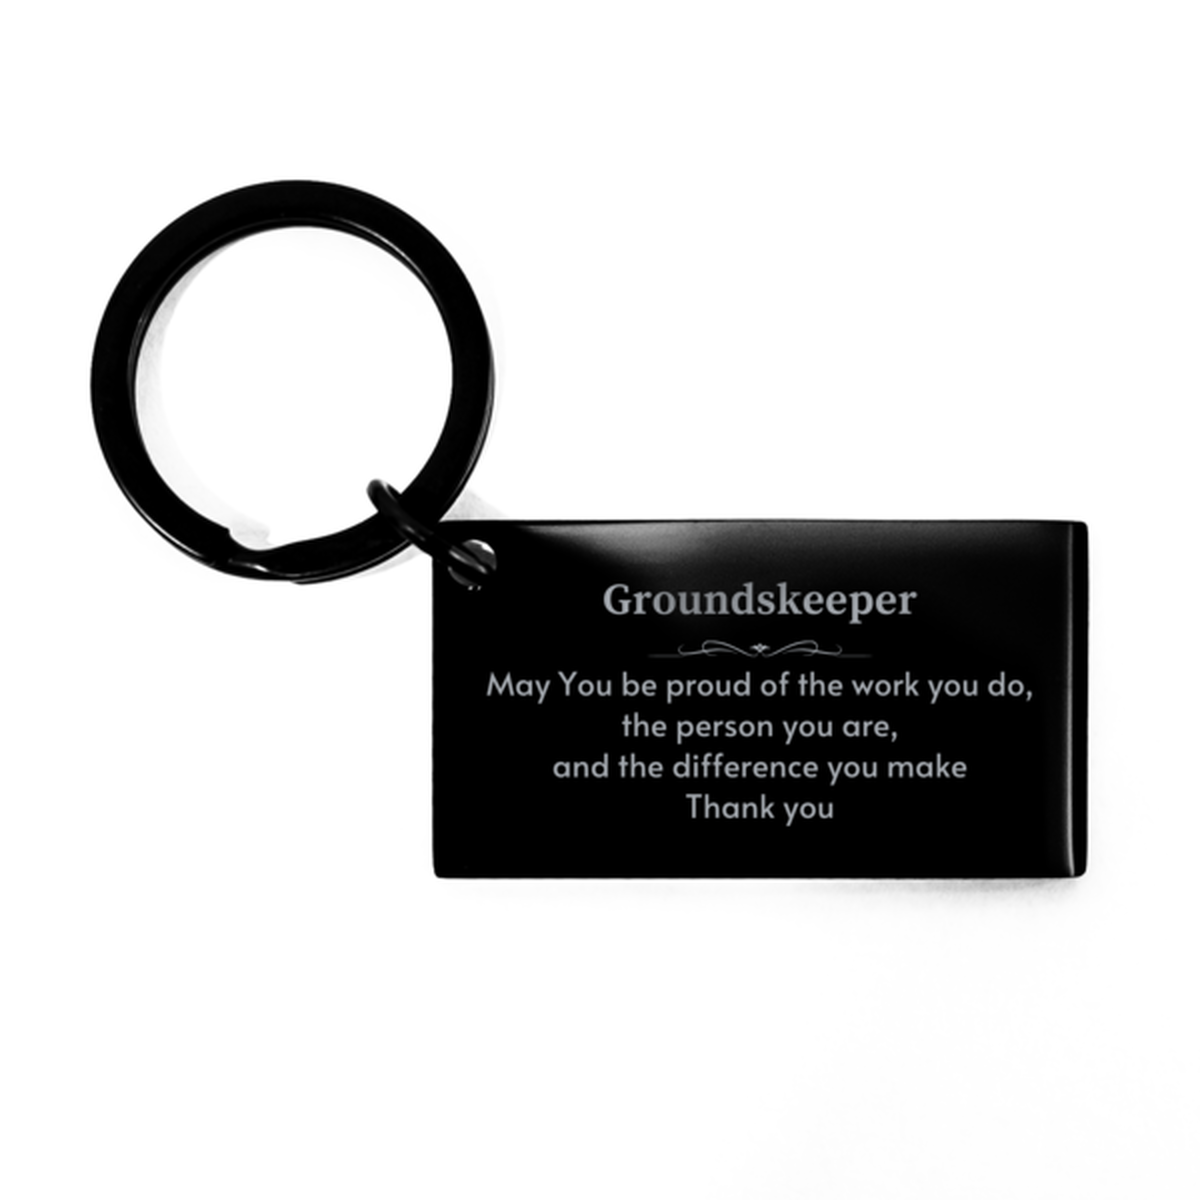 Heartwarming Keychain Retirement Coworkers Gifts for Groundskeeper, Marketing Manager May You be proud of the work you do, the person you are Gifts for Boss Men Women Friends